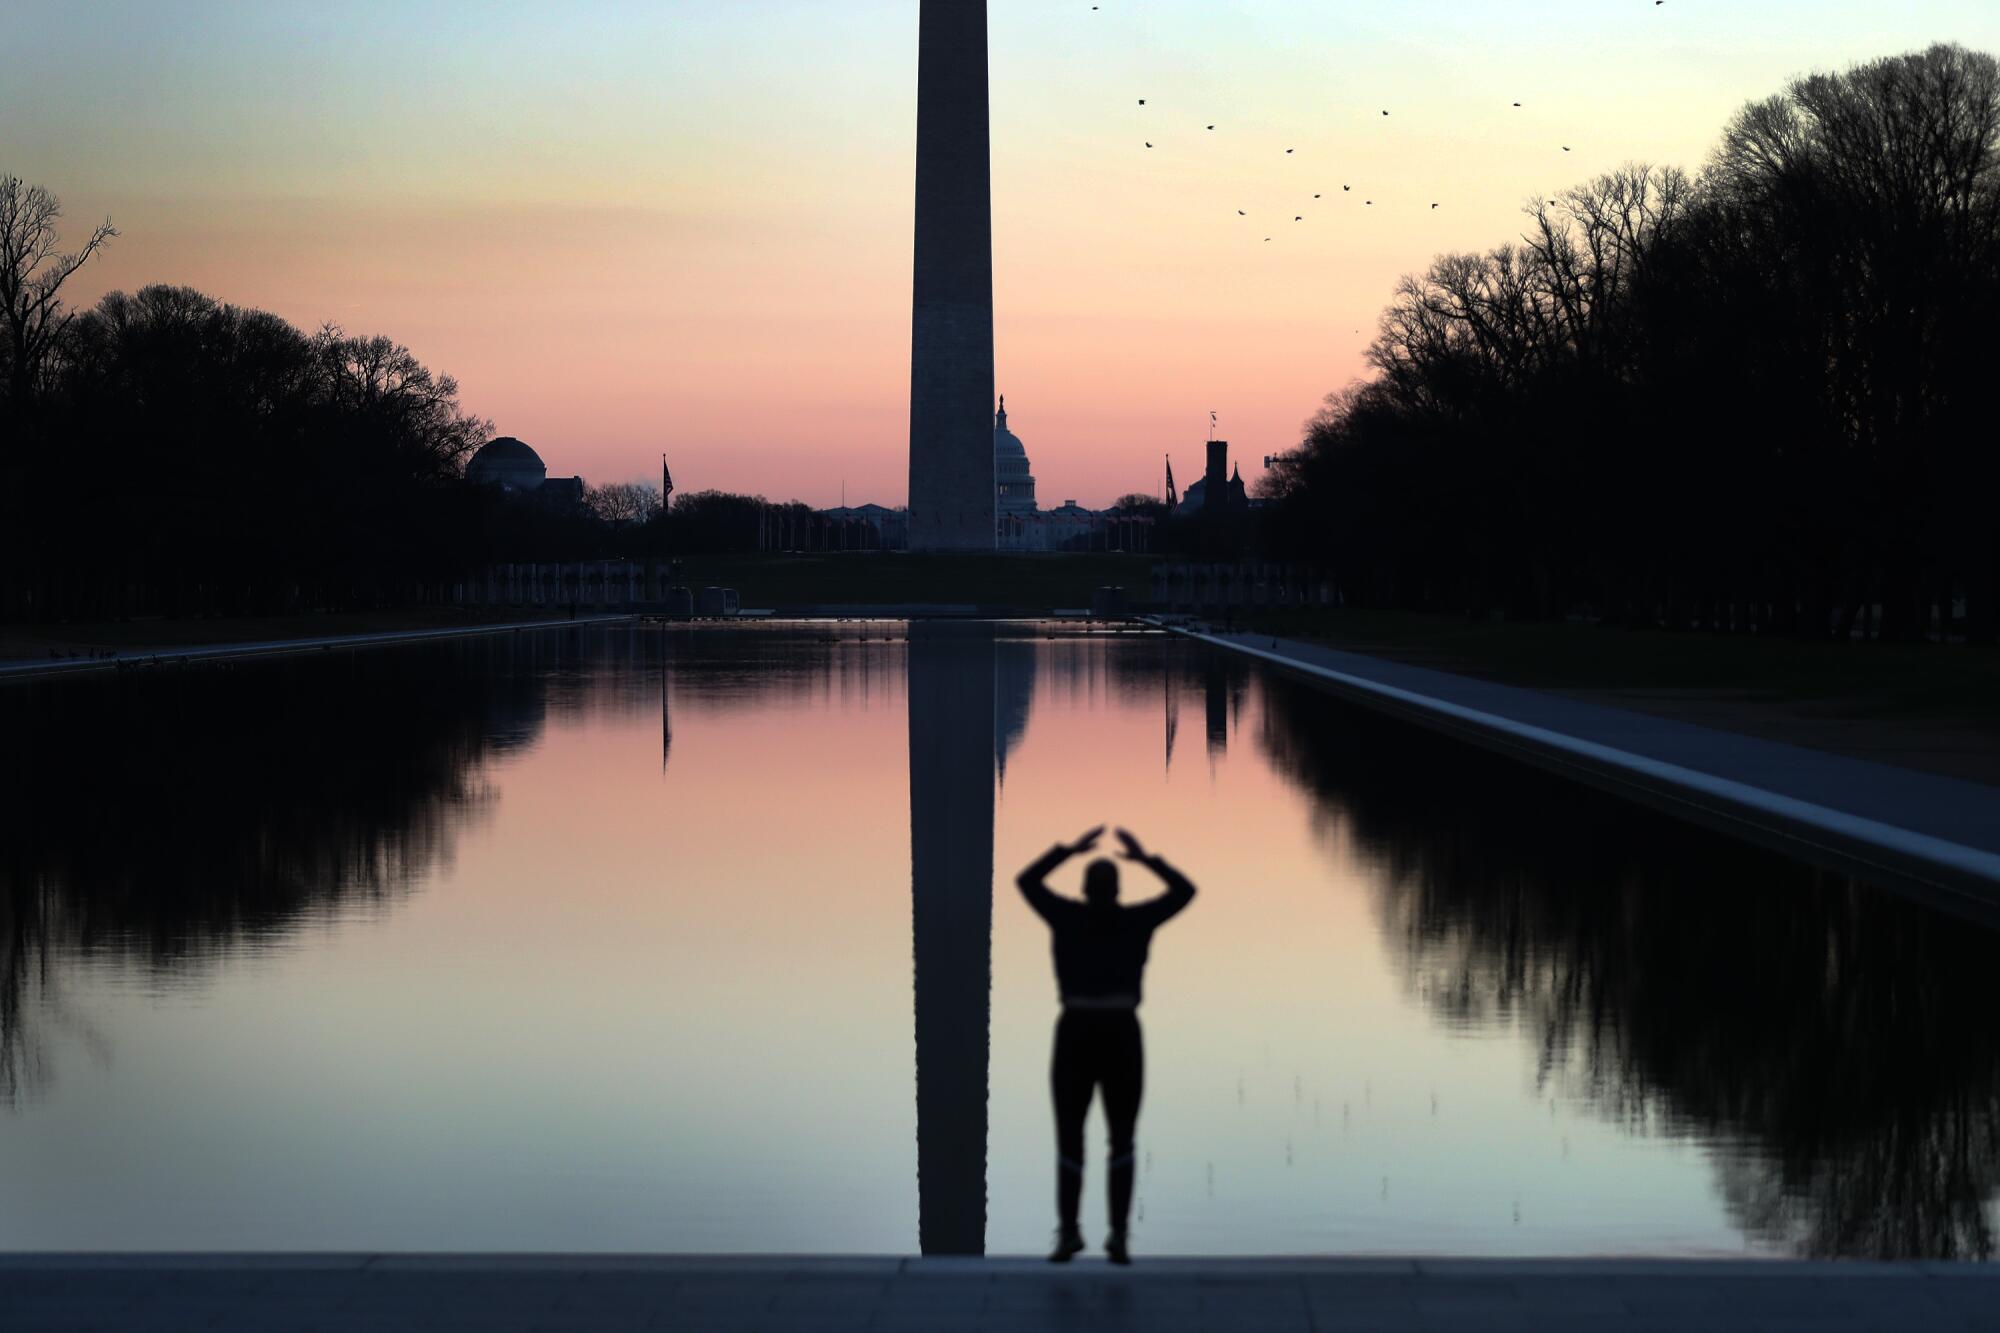 A person exercises by the Reflecting Pool, with the U.S. Capitol visible behind the Washington Monument.